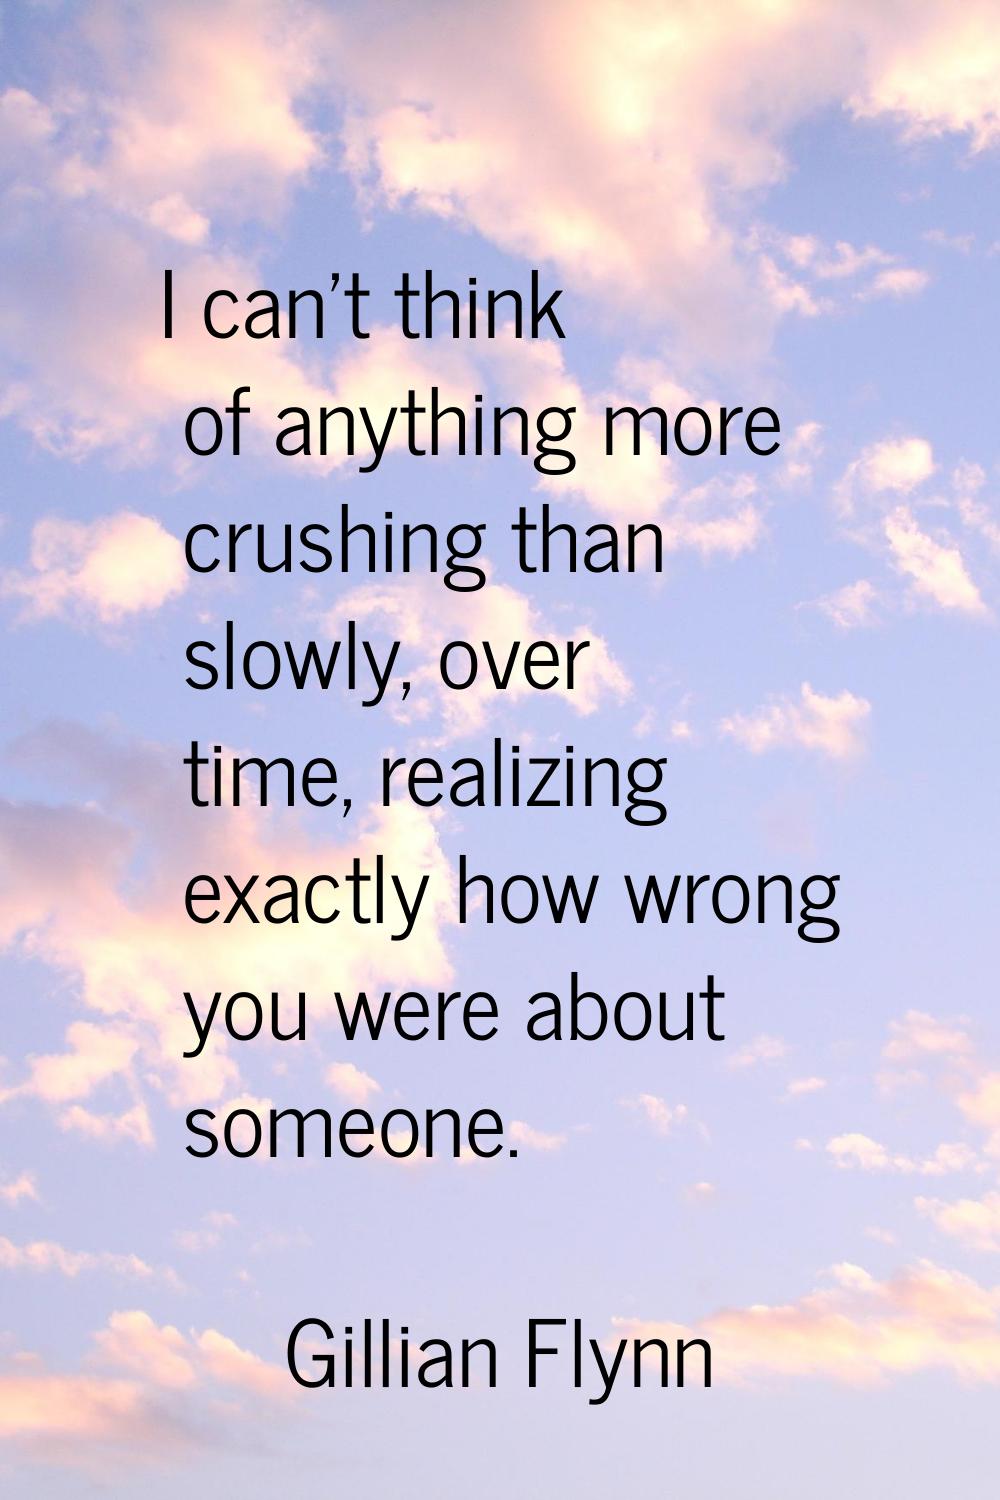 I can't think of anything more crushing than slowly, over time, realizing exactly how wrong you wer